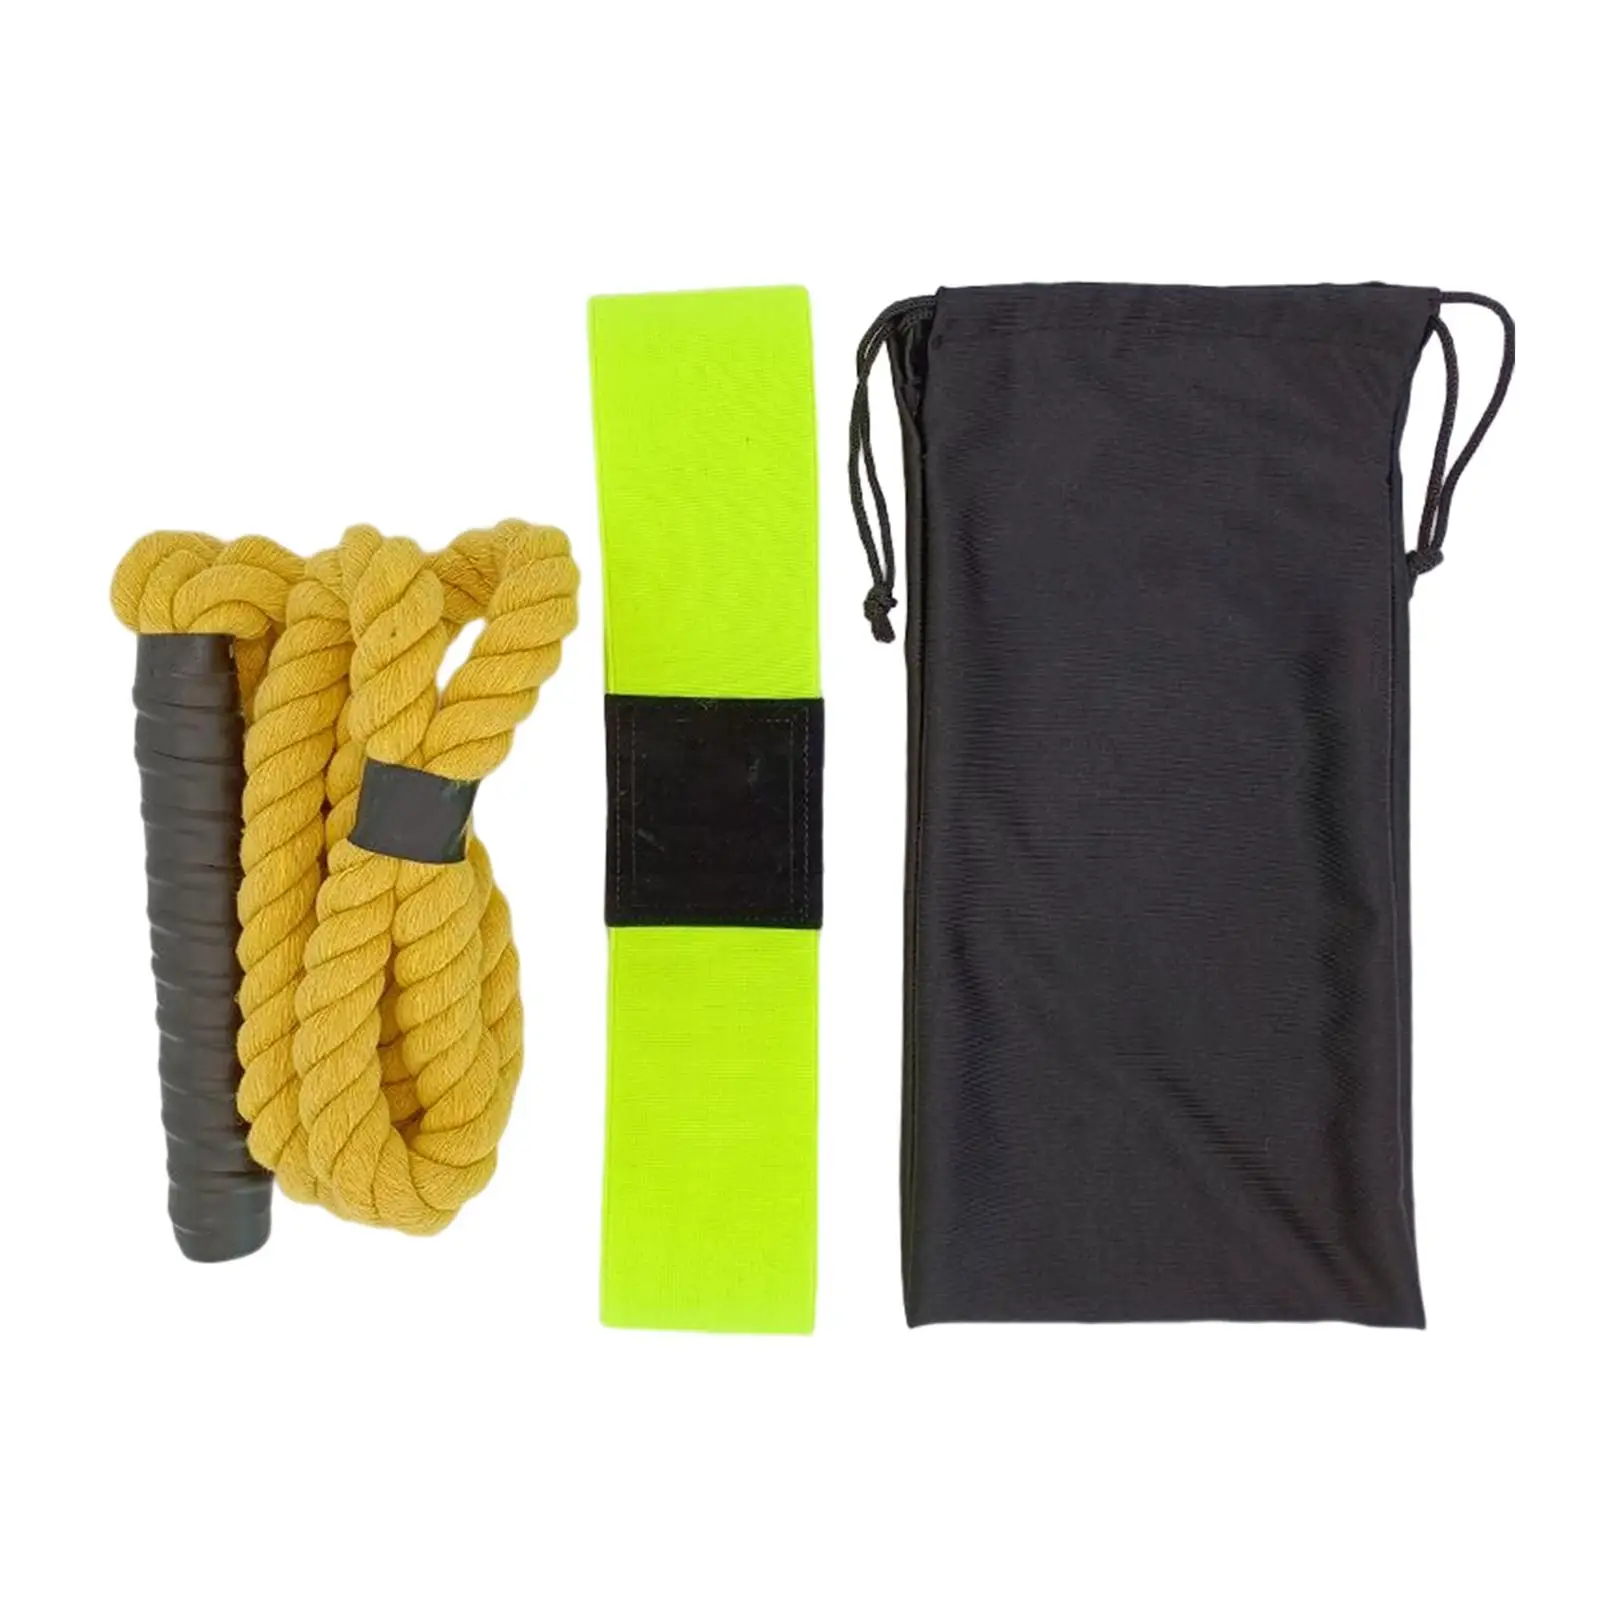 Golf Swing Trainer Aid Swing Correcting Arm Band for Improved Strength Speed Balance Rhythm